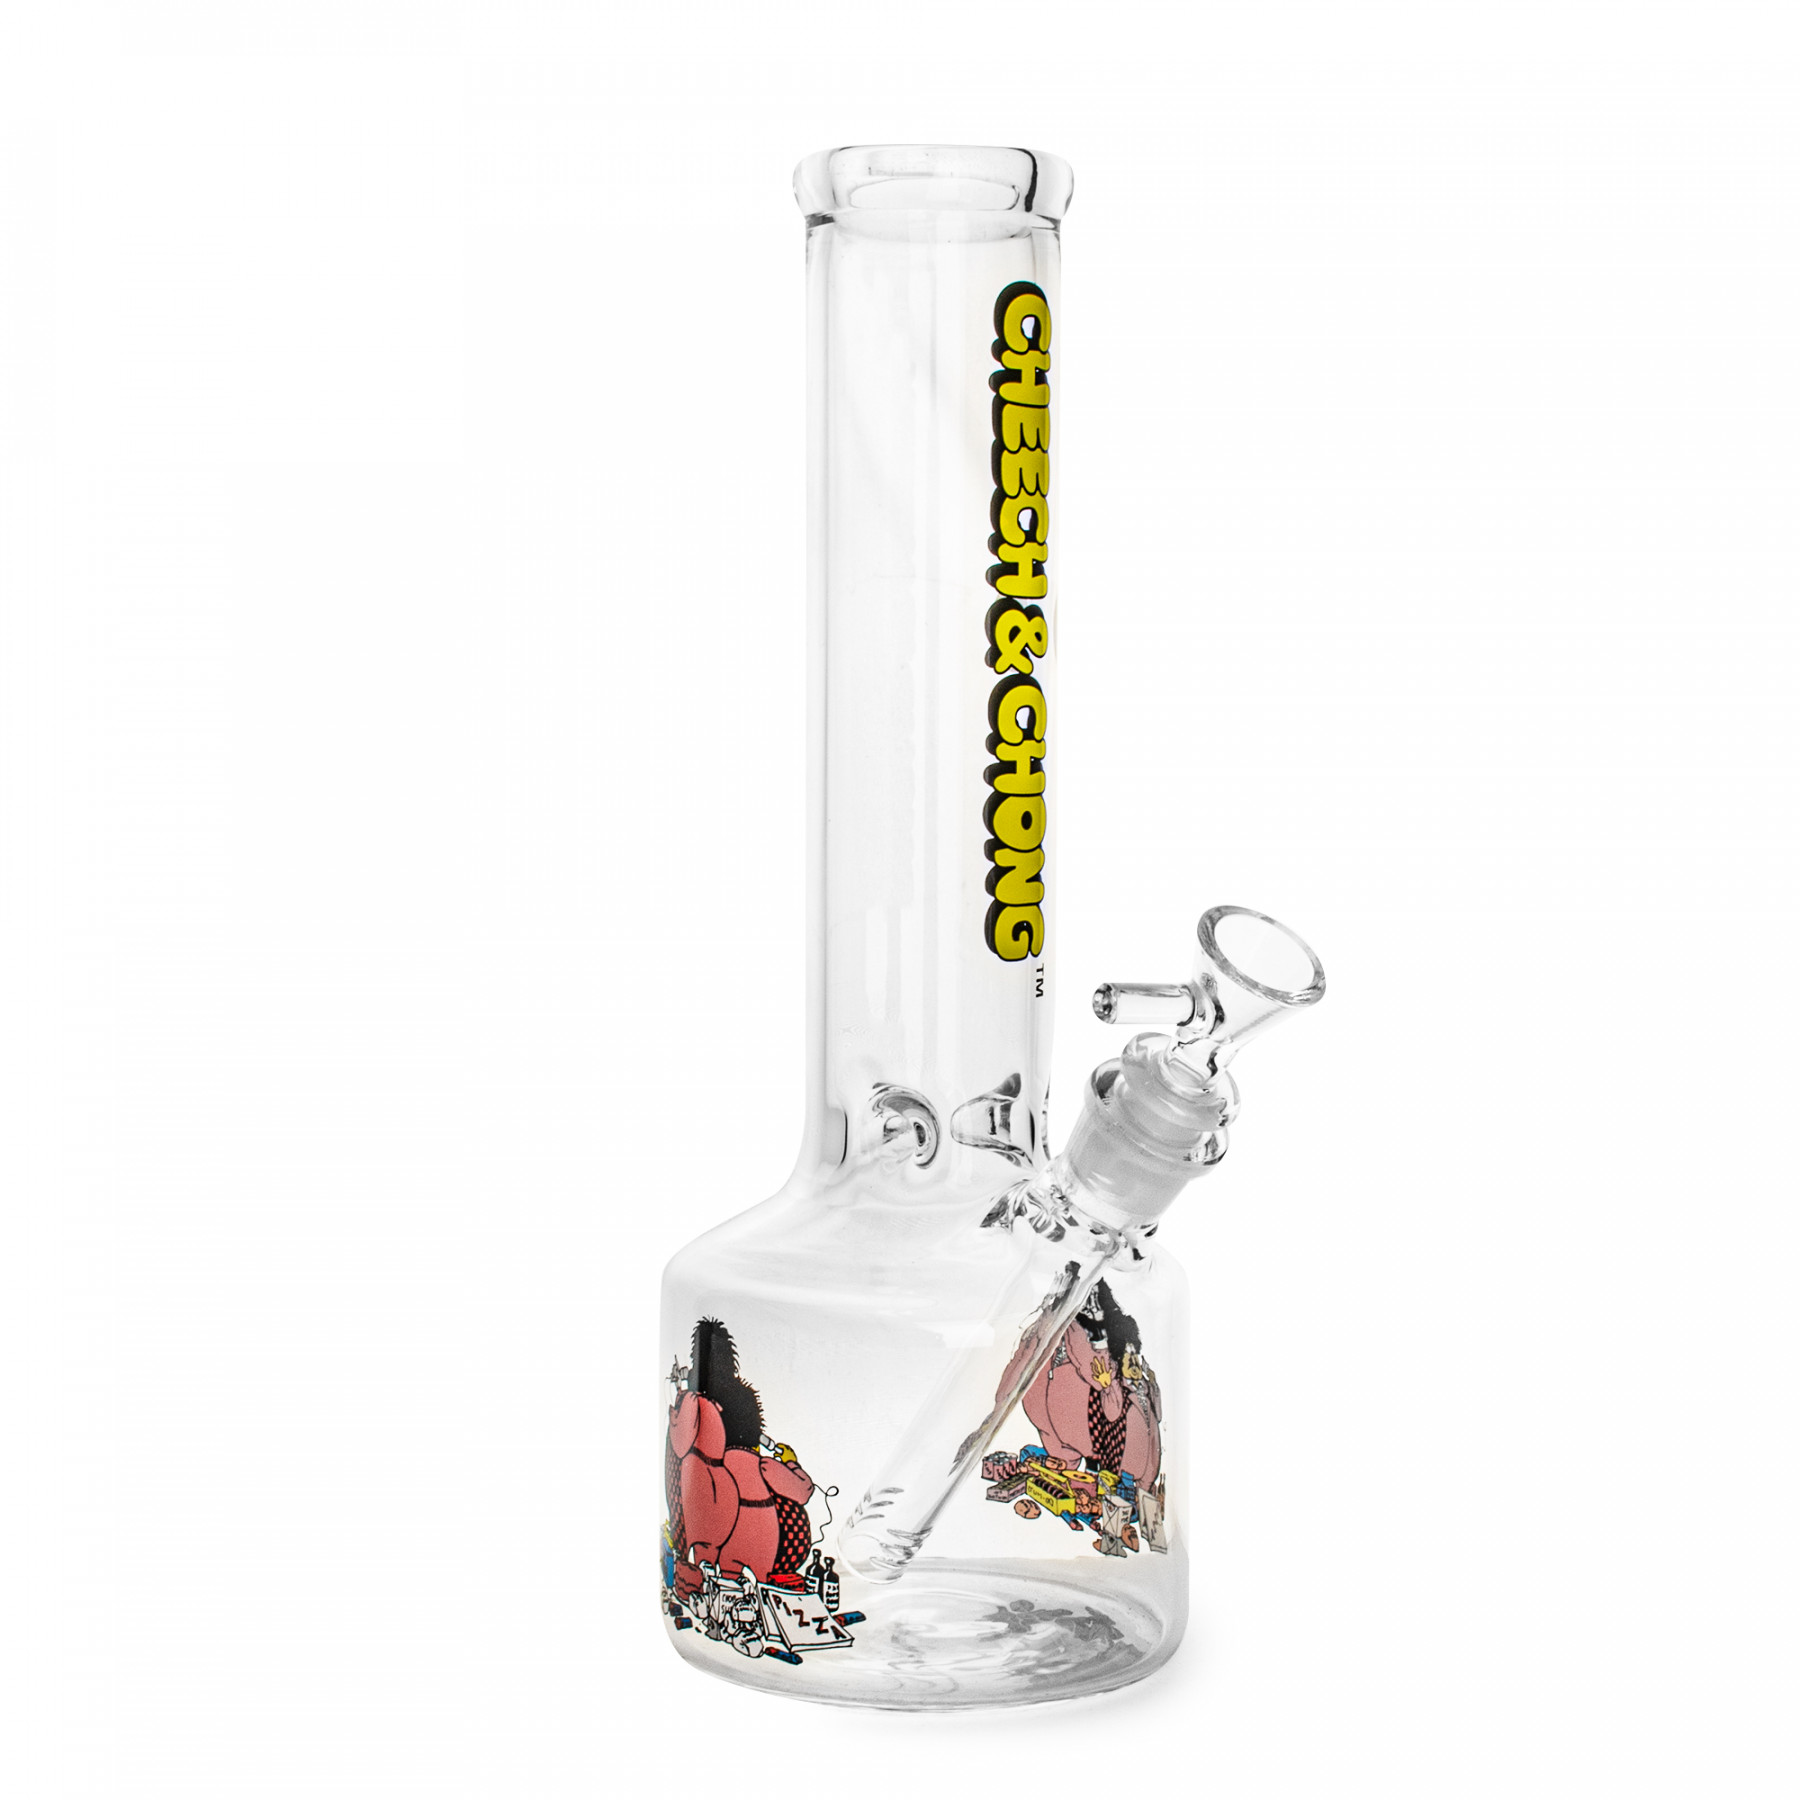 12" Bloat On Canteen Base Water Pipe